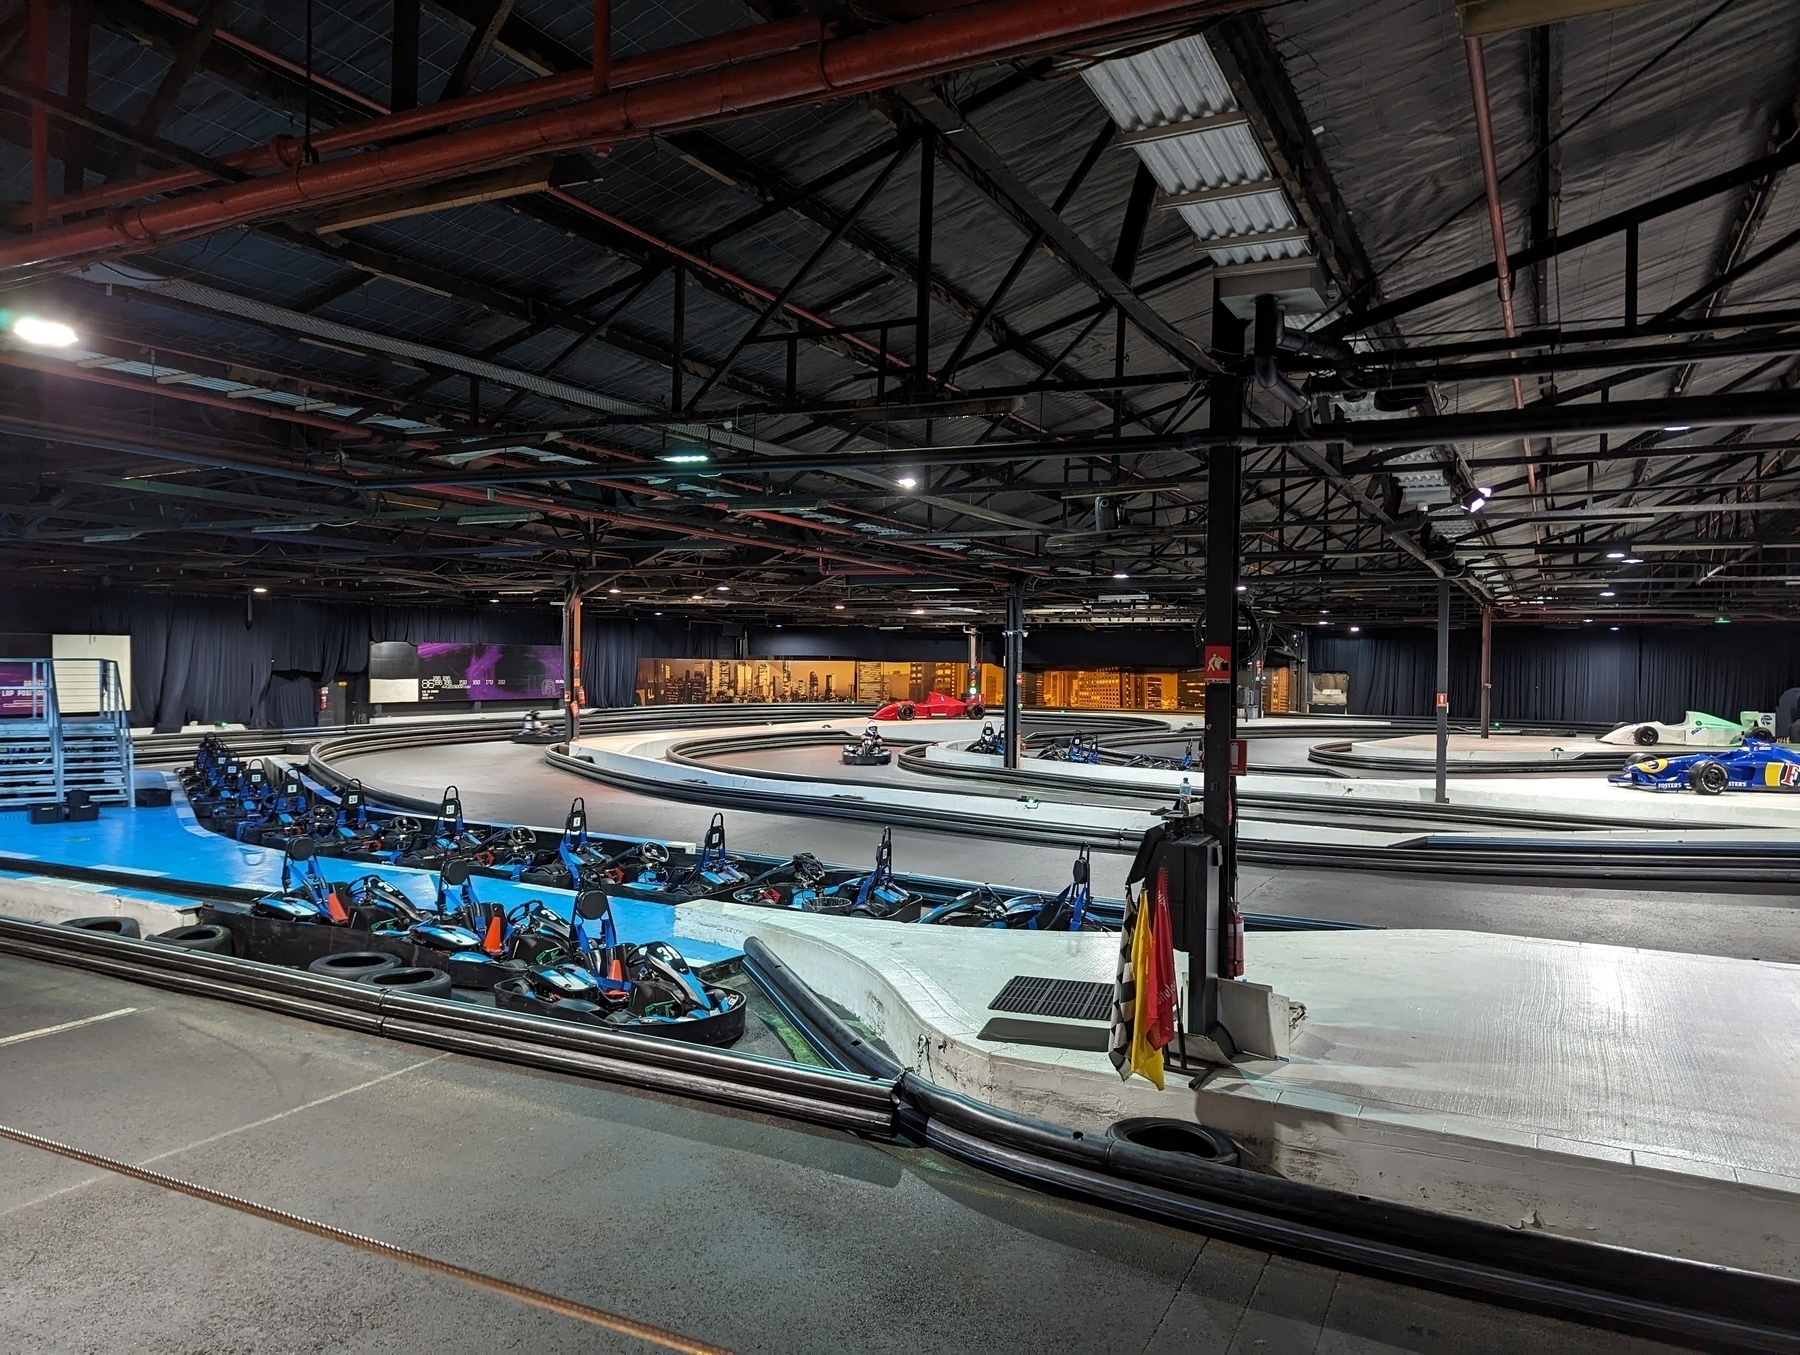 An indoor go-kart track with a couple of karts doing a circuit